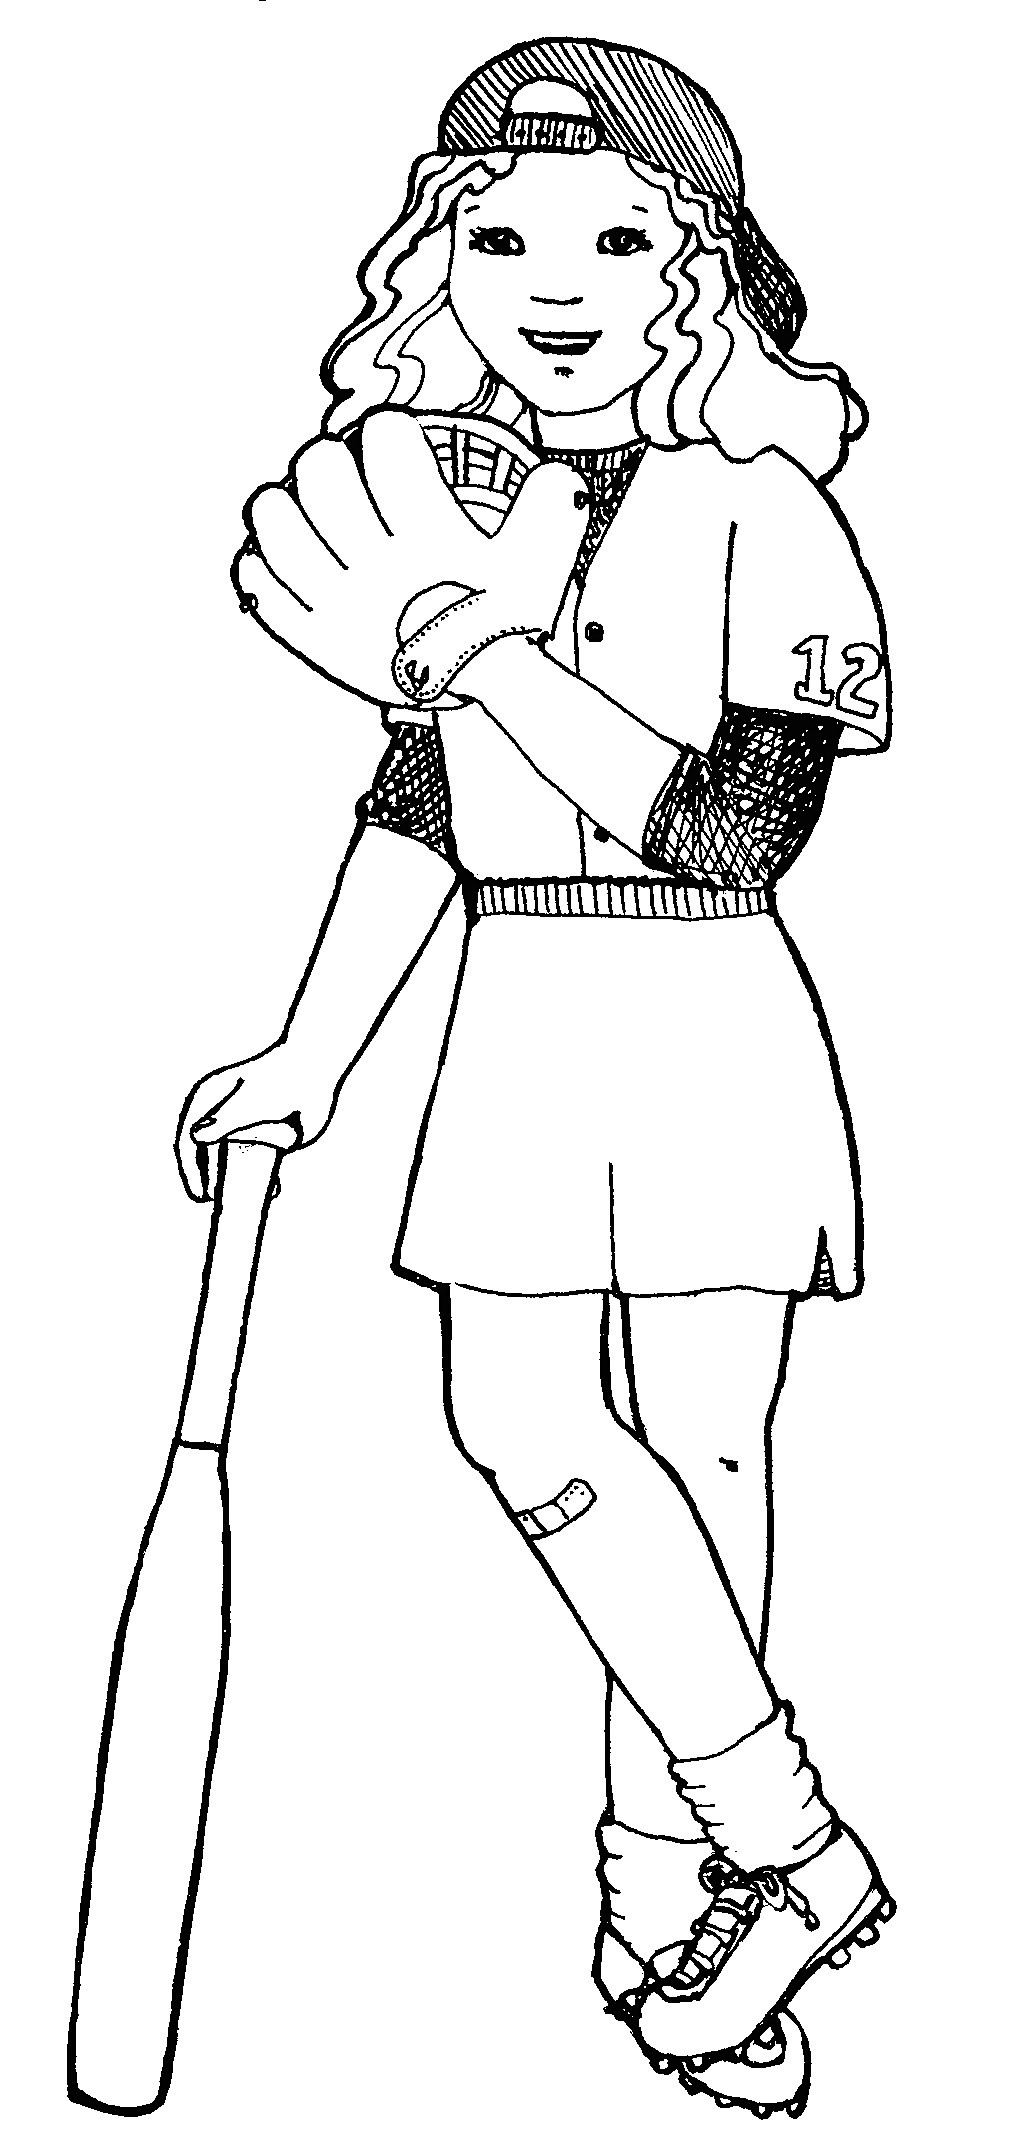 softball player and equipments to play coloring page